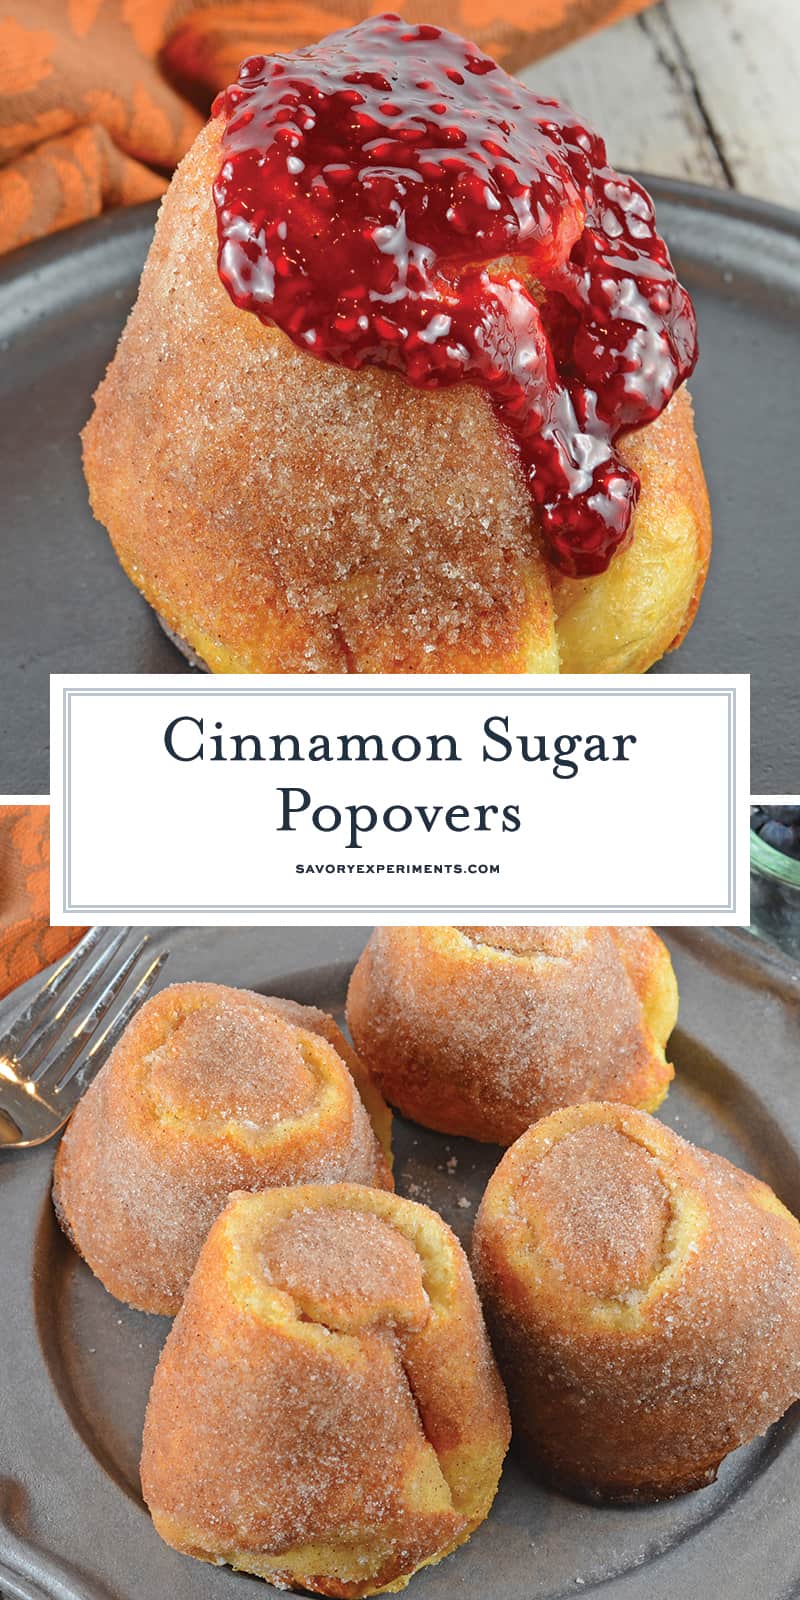 Cinnamon Sugar Popovers are easier to make than you think! A crispy outside and chewy inside coated with cinnamon and sugar, then drizzled in a fresh raspberry sauce. Perfect for a decadent breakfast or dessert. #popovers #howtomakepopovers www.savoryexperiments.com 